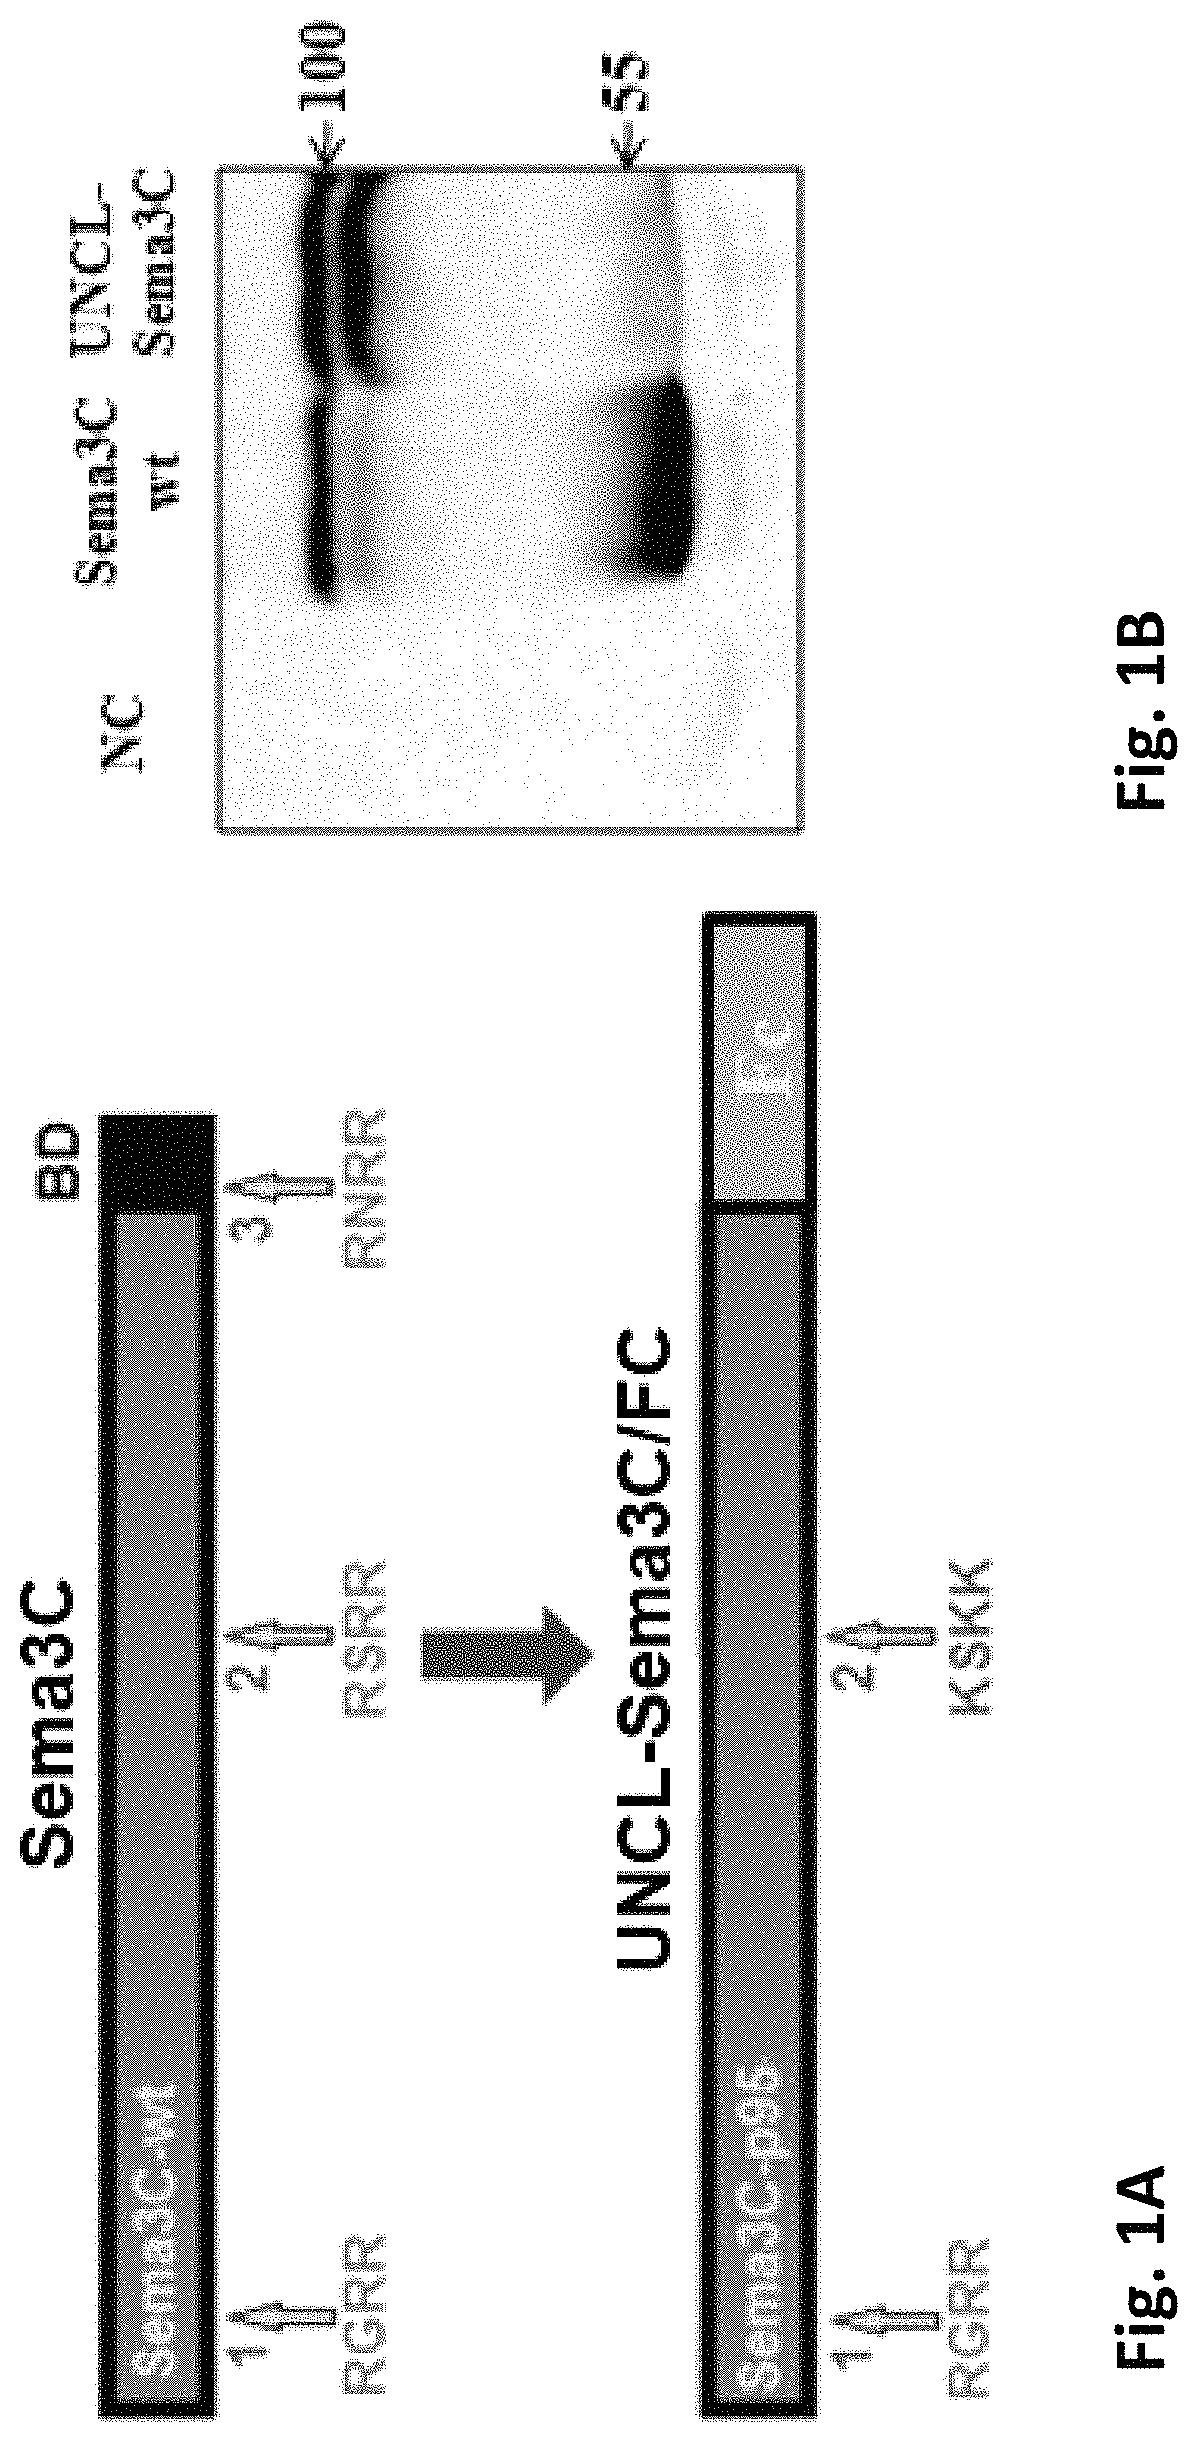 Semaphorin 3C variants, compositions comprising said variants and methods of use thereof in treating eye diseases